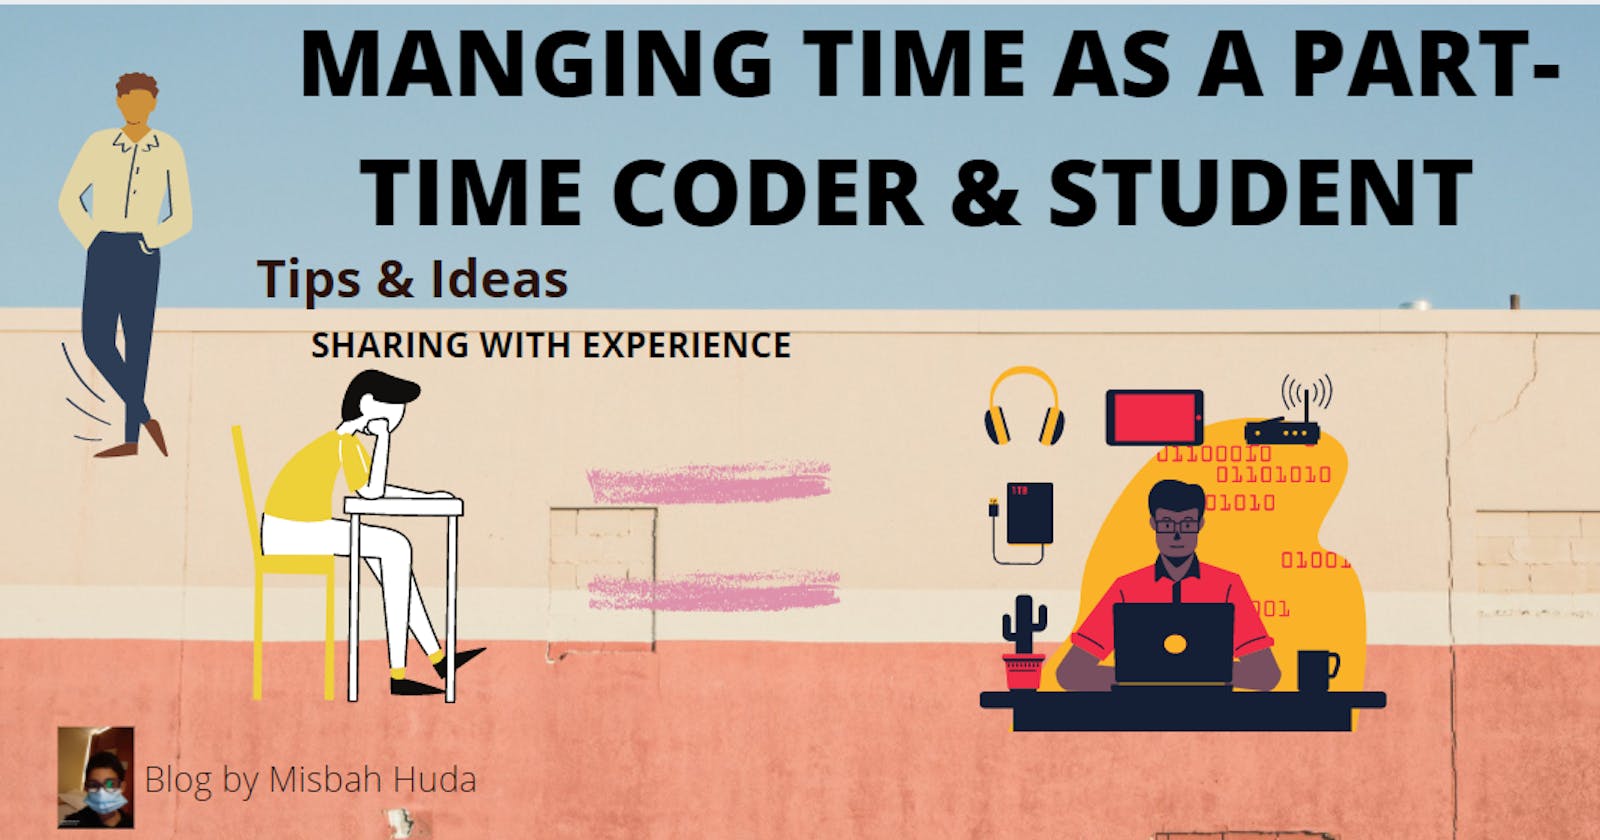 HOW TO MANAGE TIME AS A PART-TIME CODER & STUDENT?